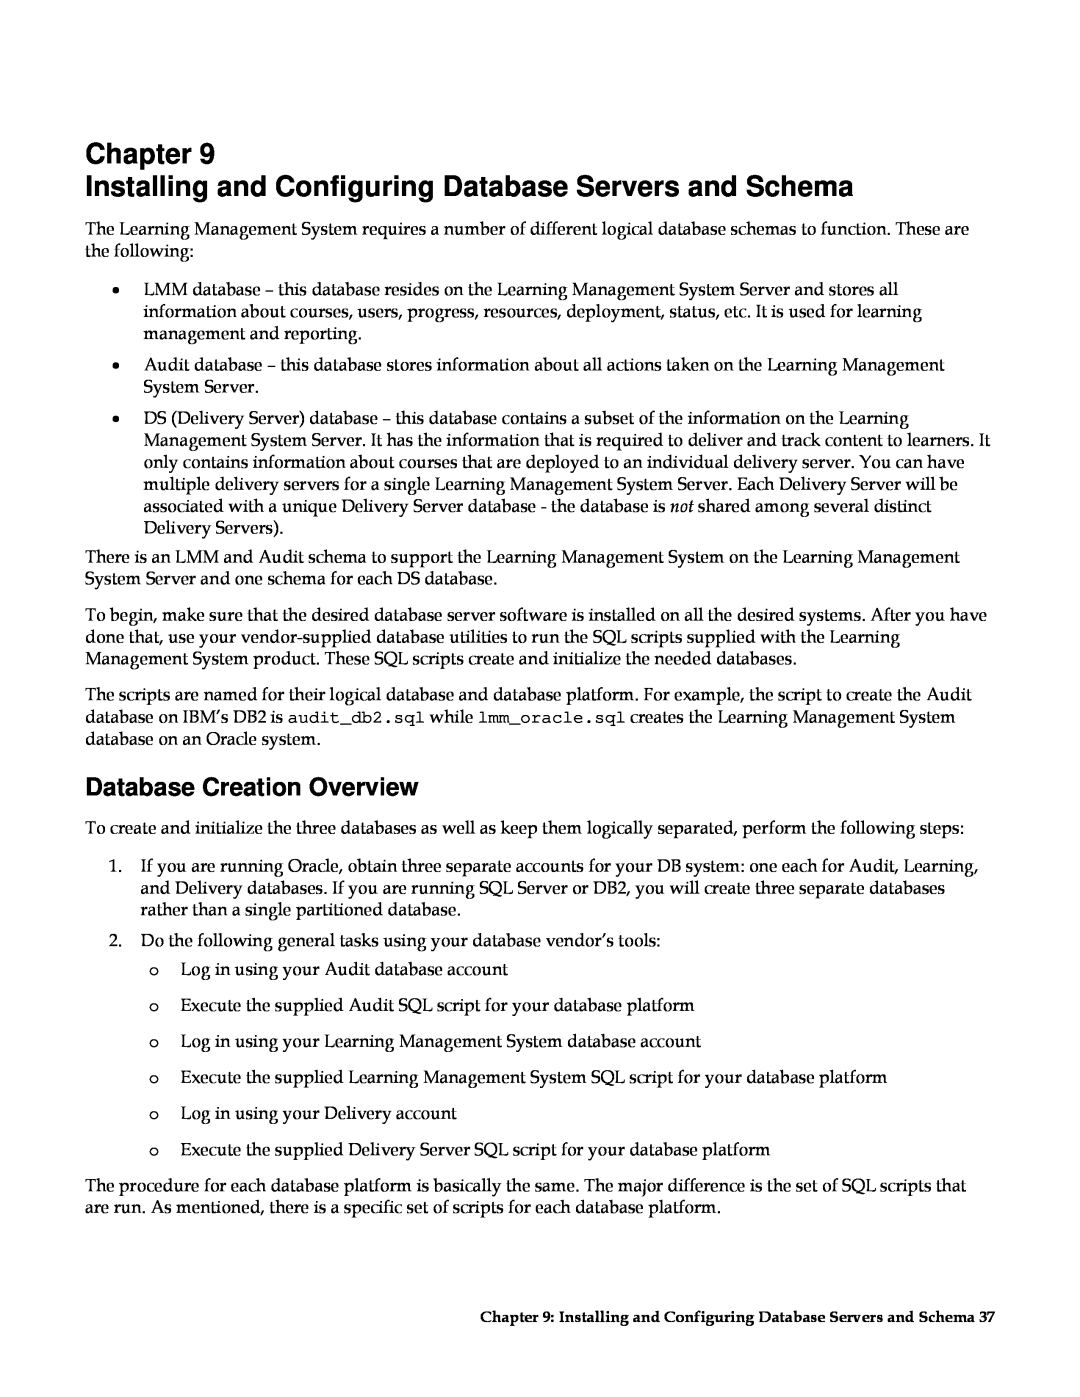 IBM G210-1784-00 manual Chapter Installing and Configuring Database Servers and Schema, Database Creation Overview 